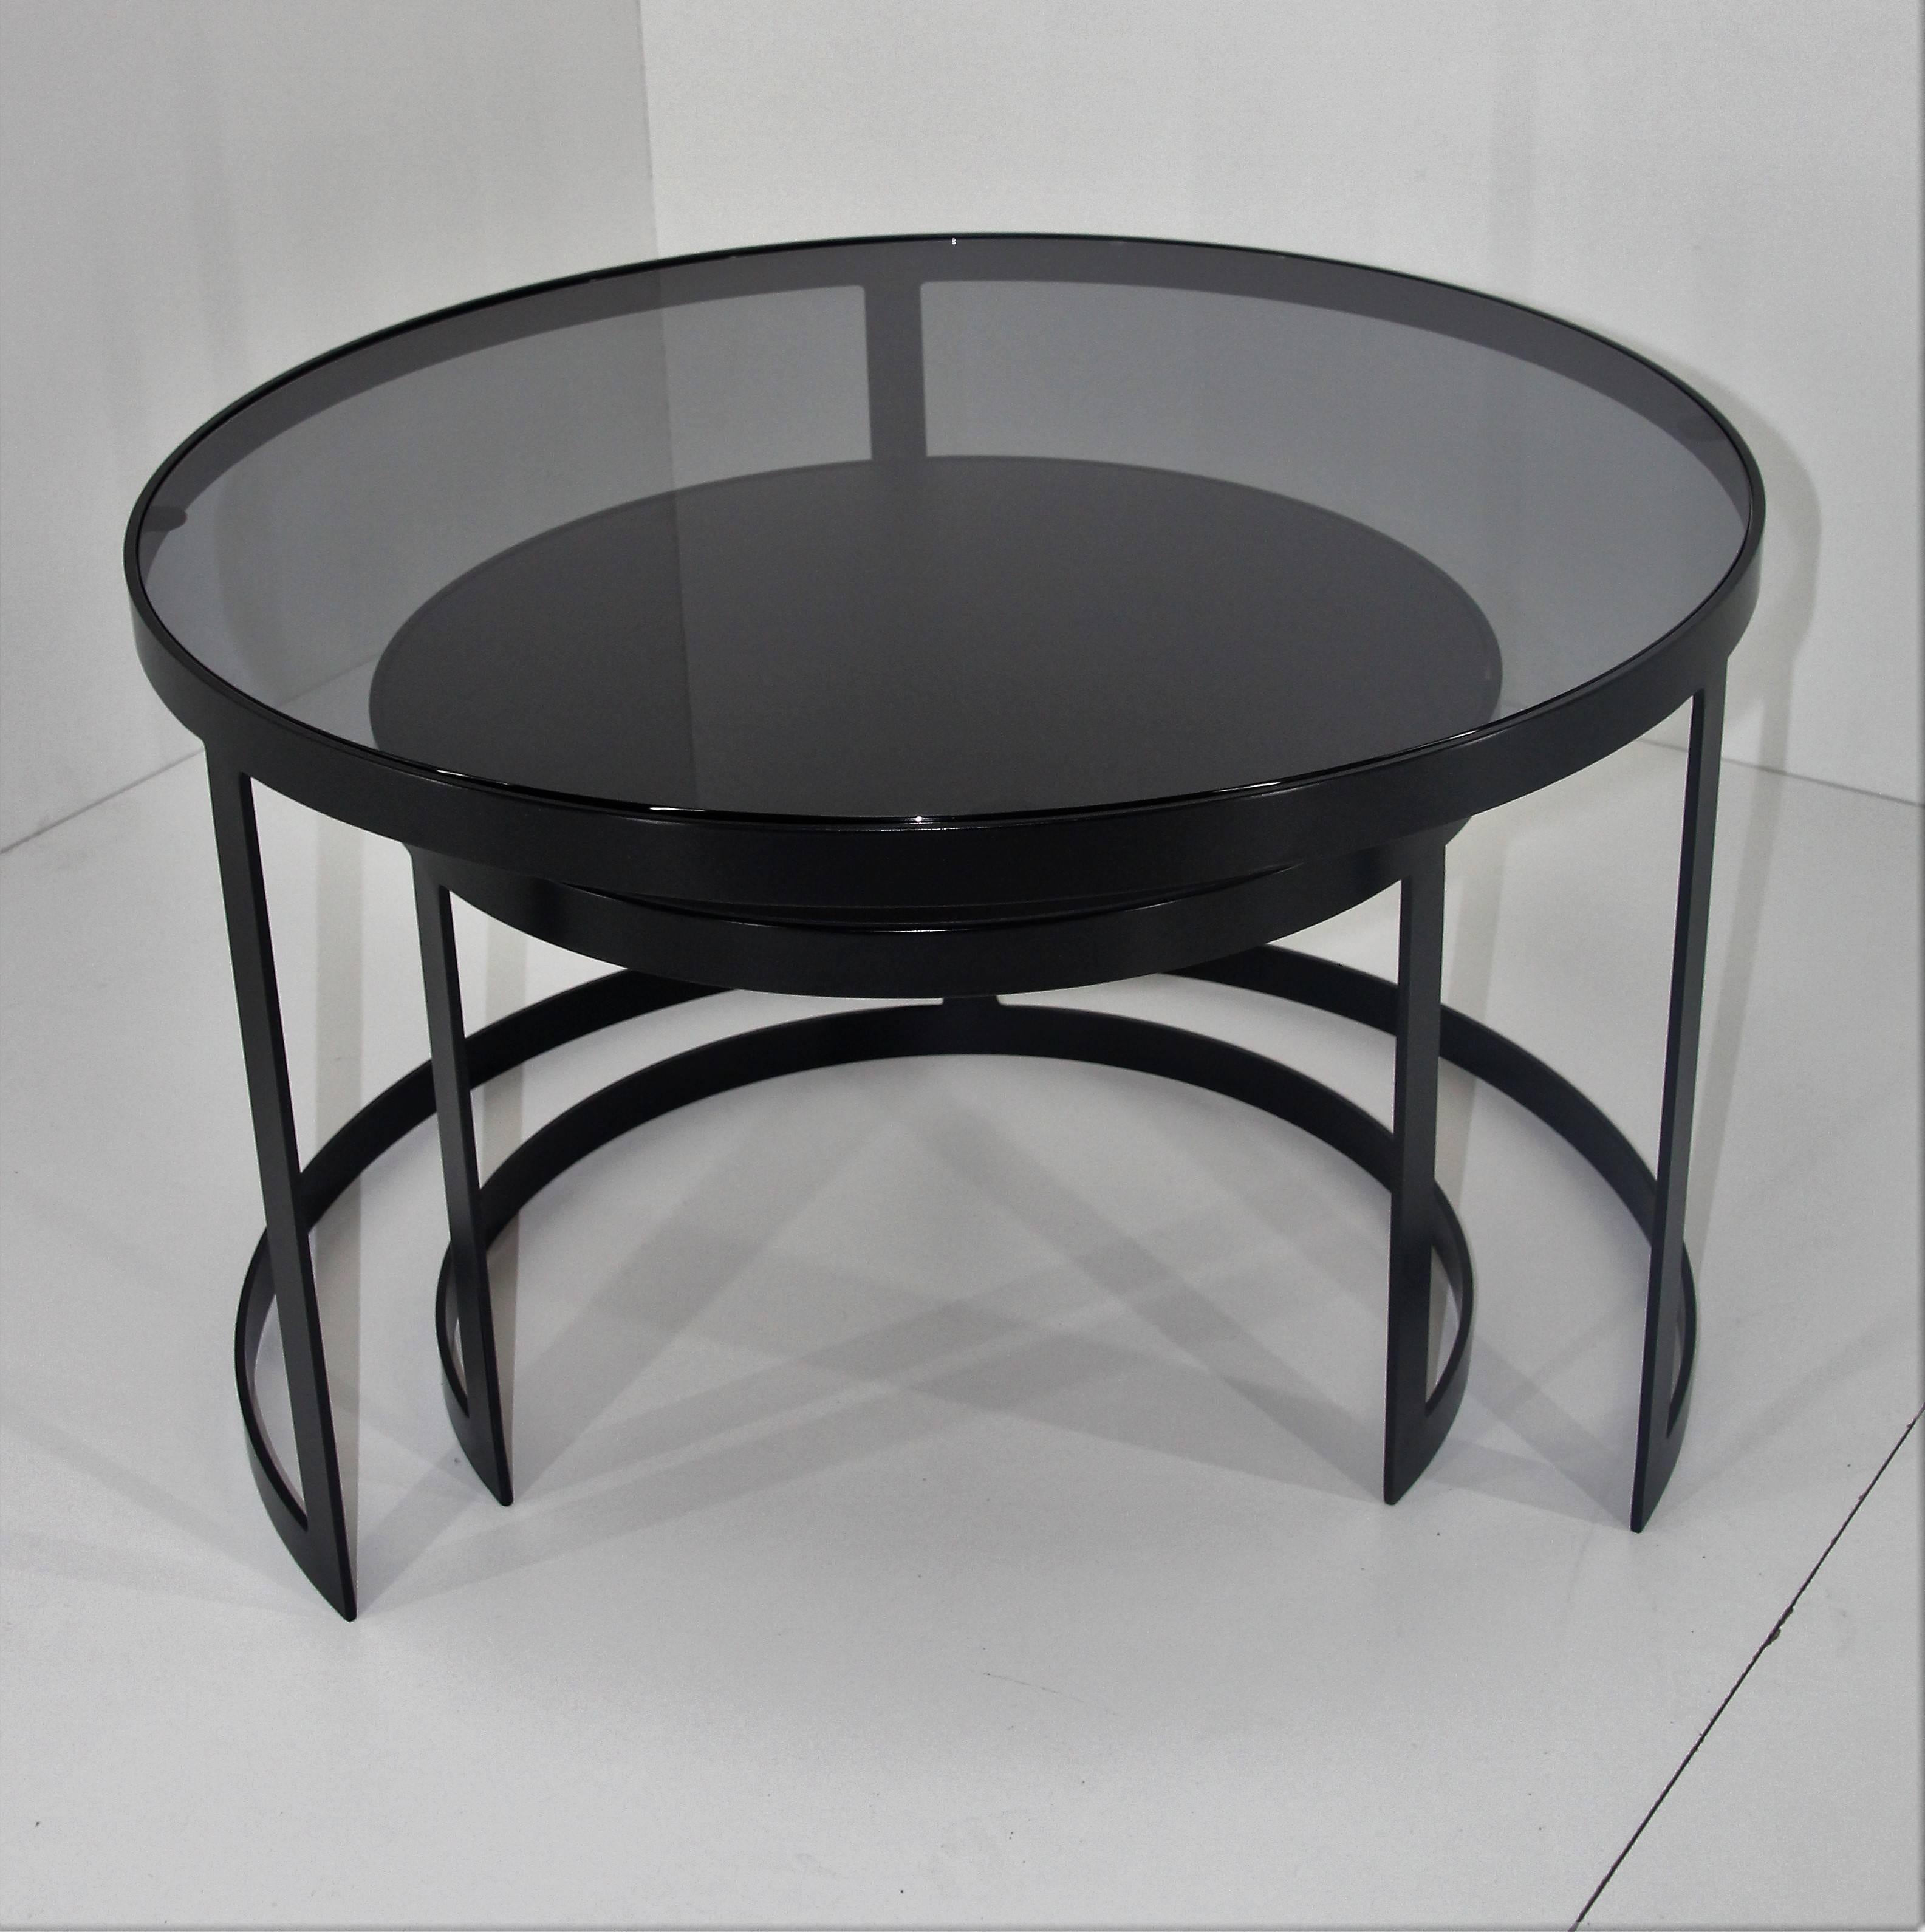 21st century set of two iron nesting tables with glass and wood tops, Spain

Frame material: Extruded and hand-welded iron rods
Frame finish: Black
Iron rods dimensions: 1.96 inches x 0.1 inches
Top: 0.4 inches wood / 0.4 inches glass

Table